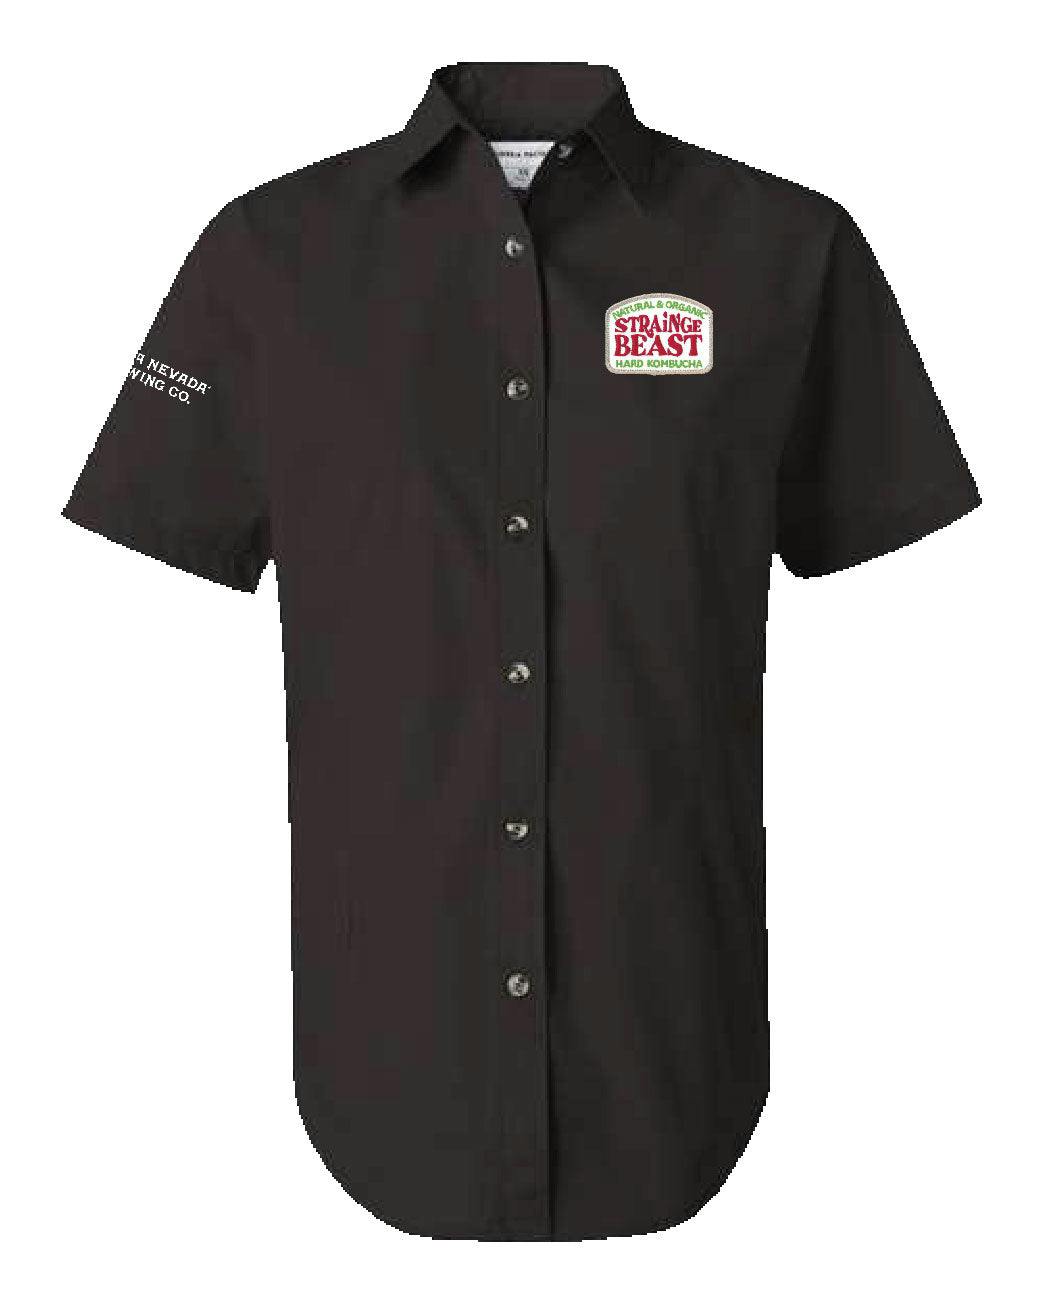 Sierra Nevada Brewing Co. Women's Strainge Beast Short Sleeve Button Up Shirt - front view with logo on chest